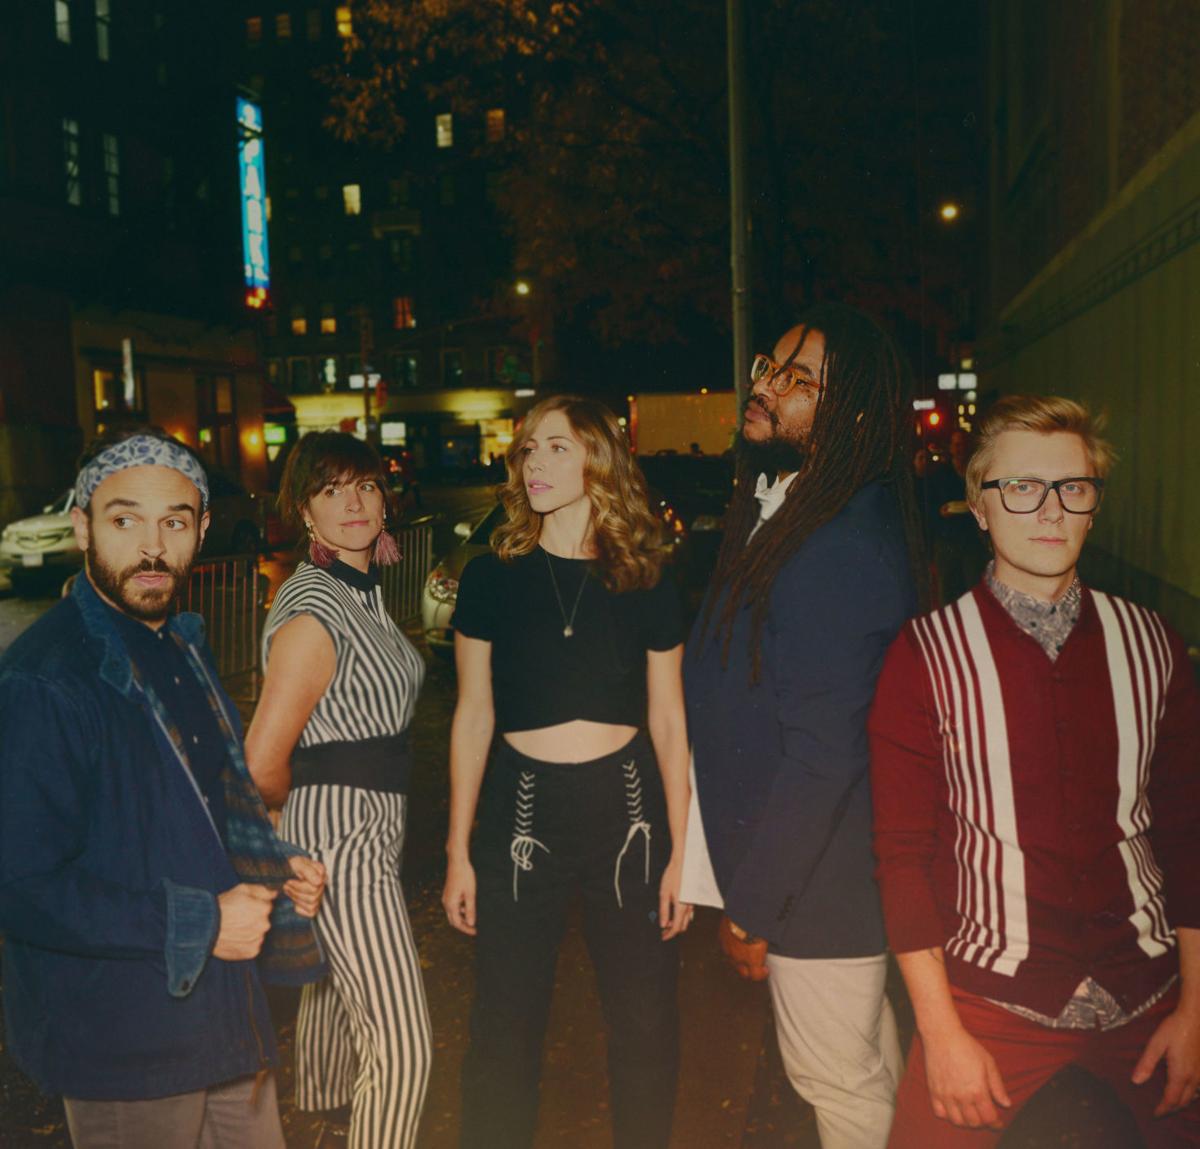 Lake Street Dive hits Harvester with a new album, new band member